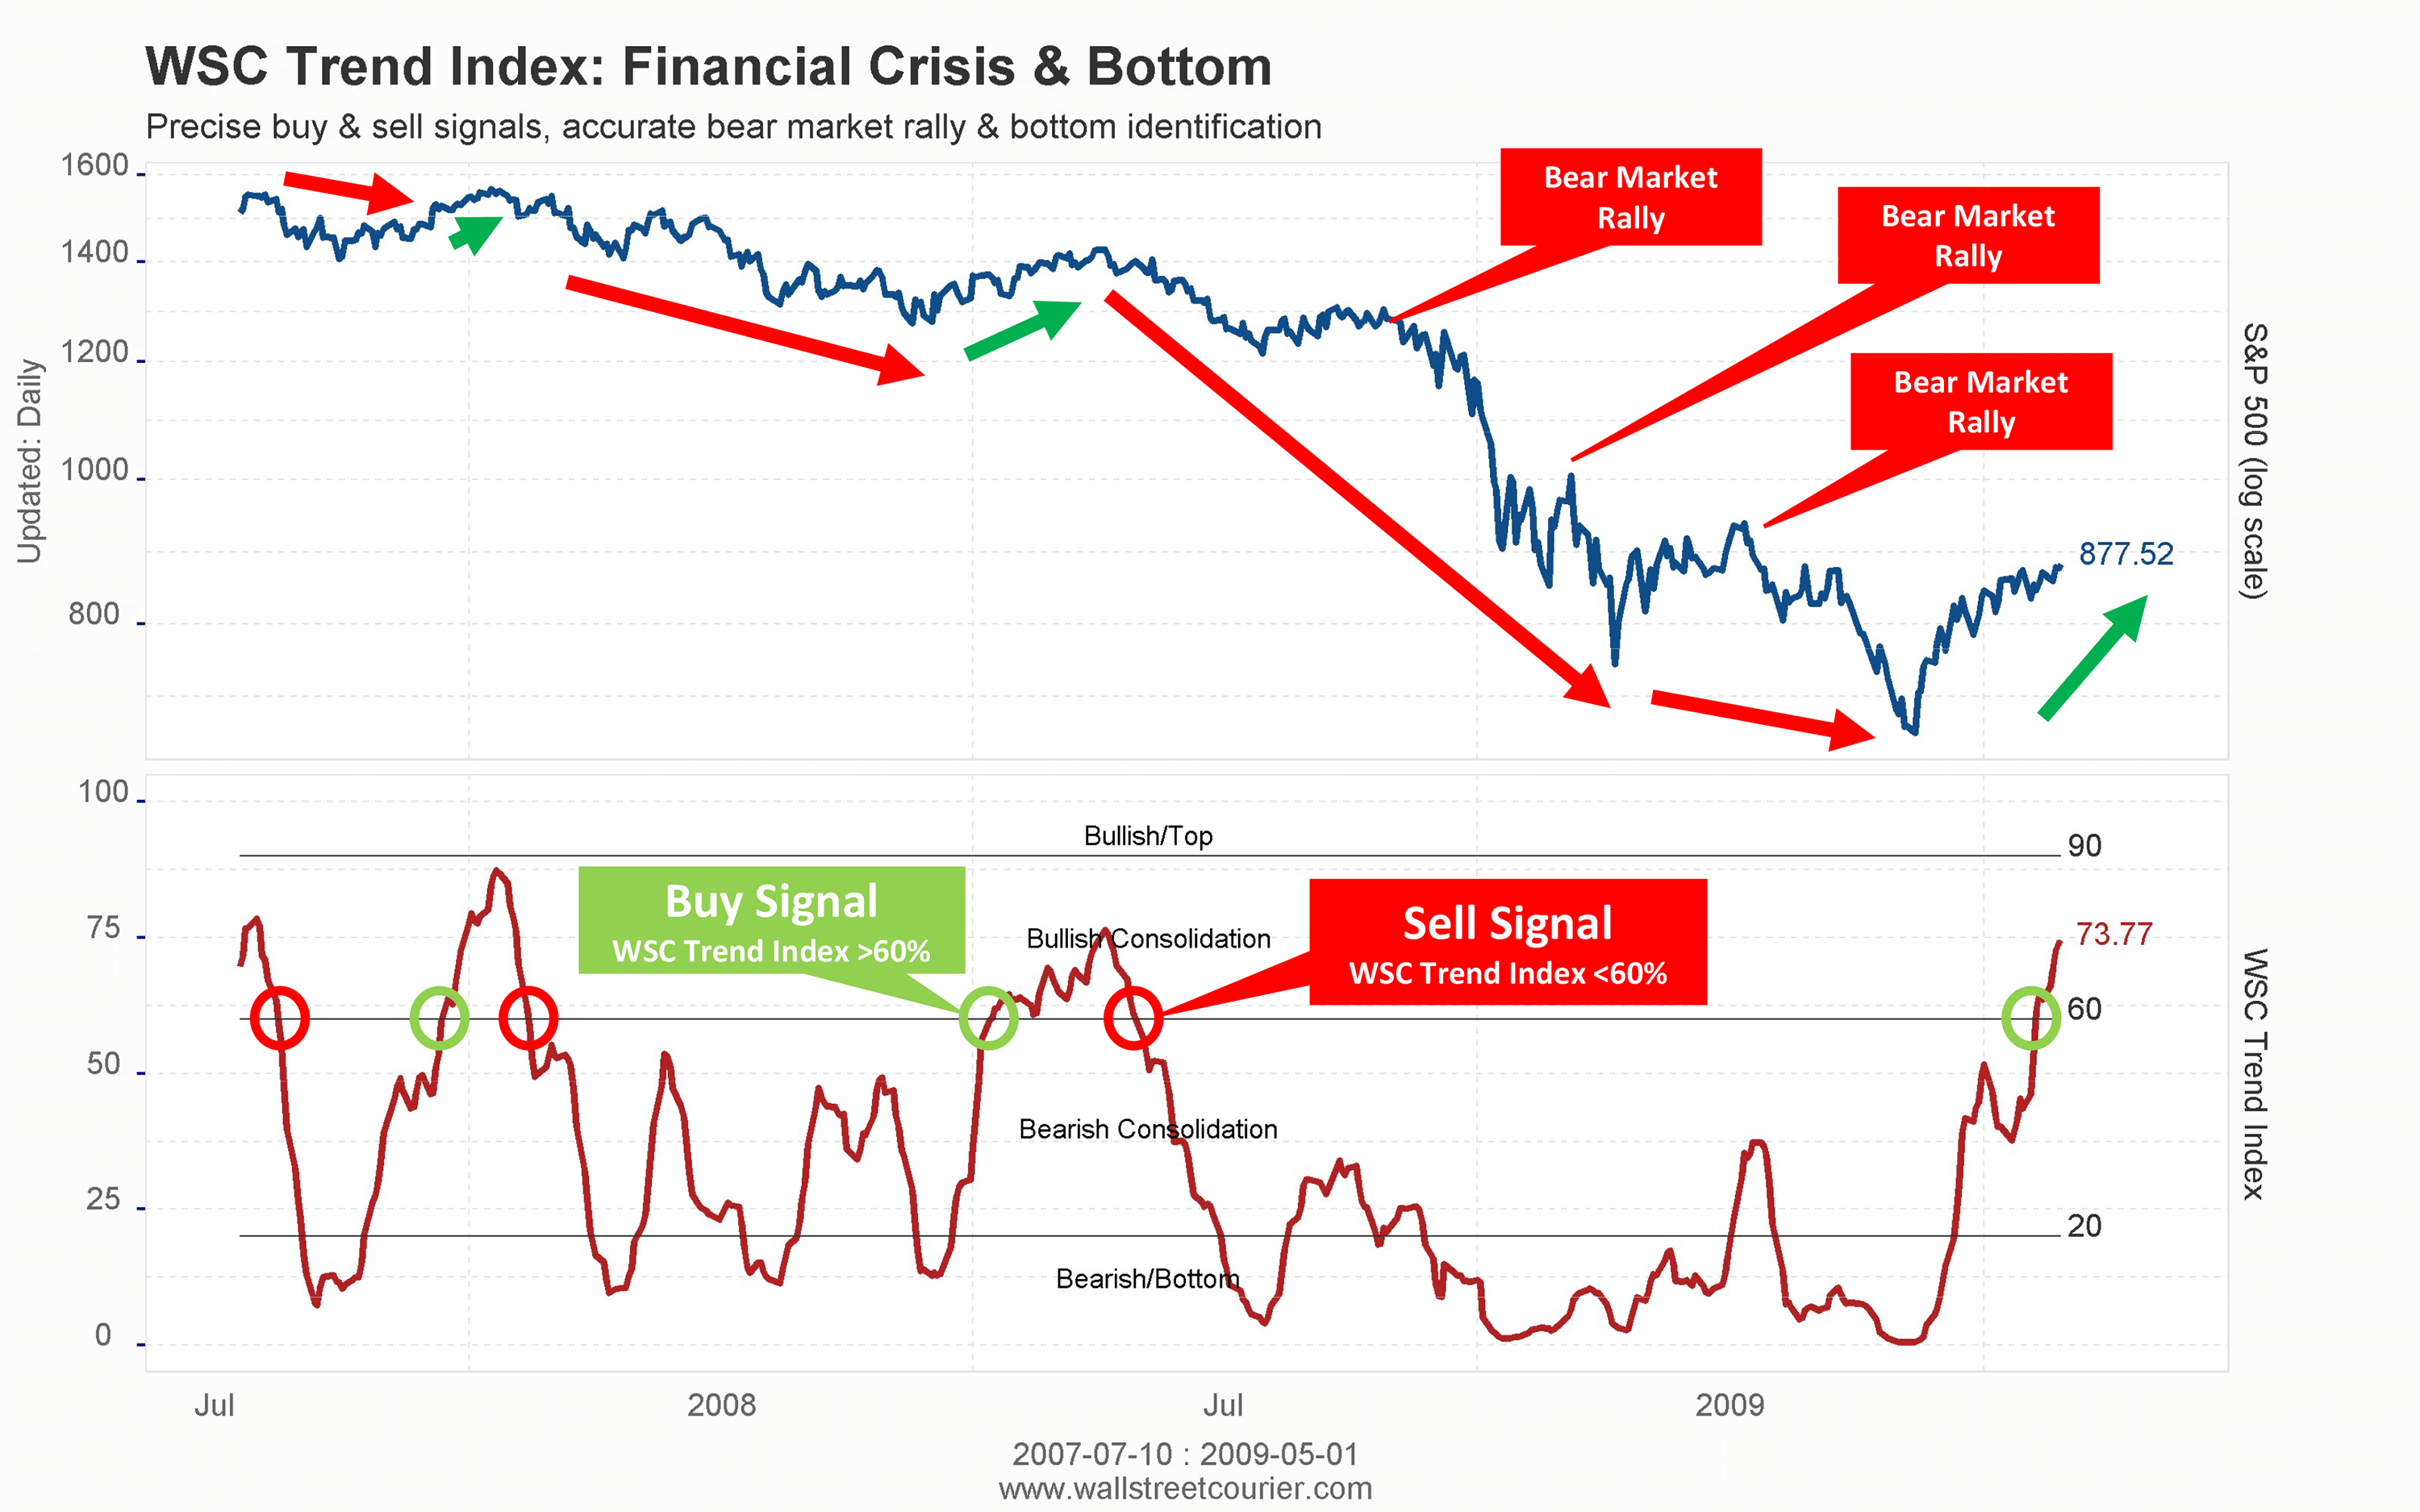 WSC Trend Index chart showing reliable guidance during 2008 financial crisis